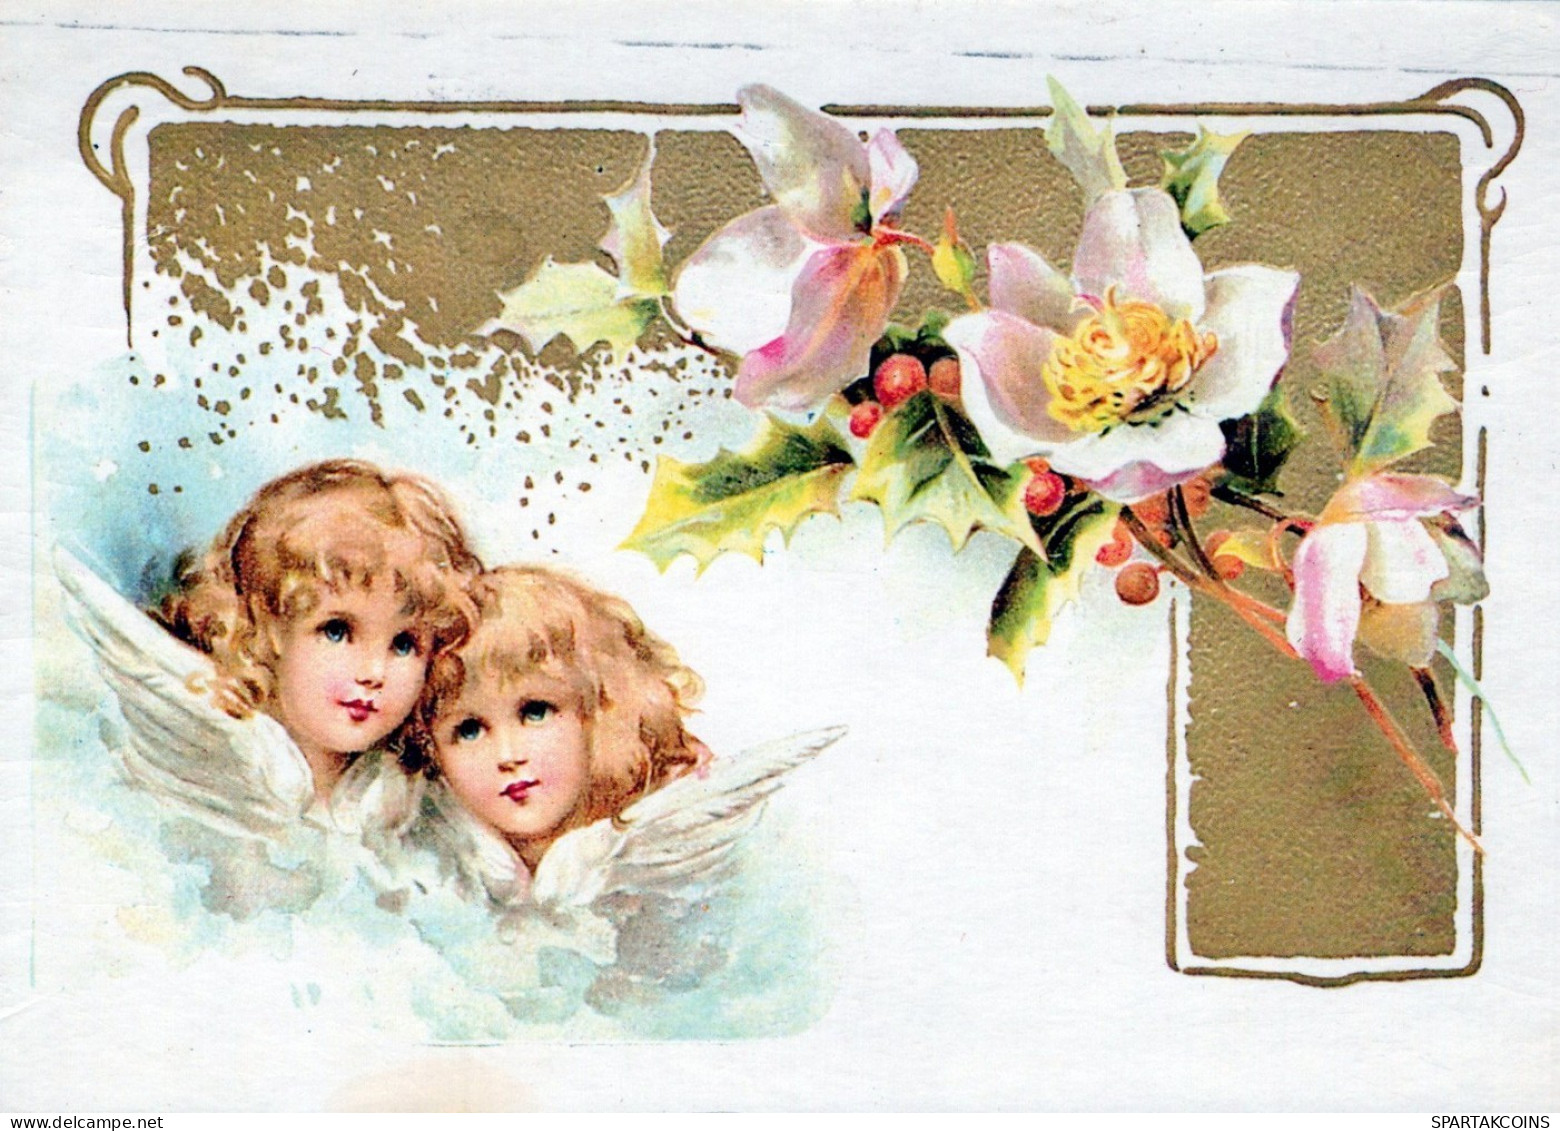 ANGELO Buon Anno Natale Vintage Cartolina CPSM #PAH019.IT - Angels